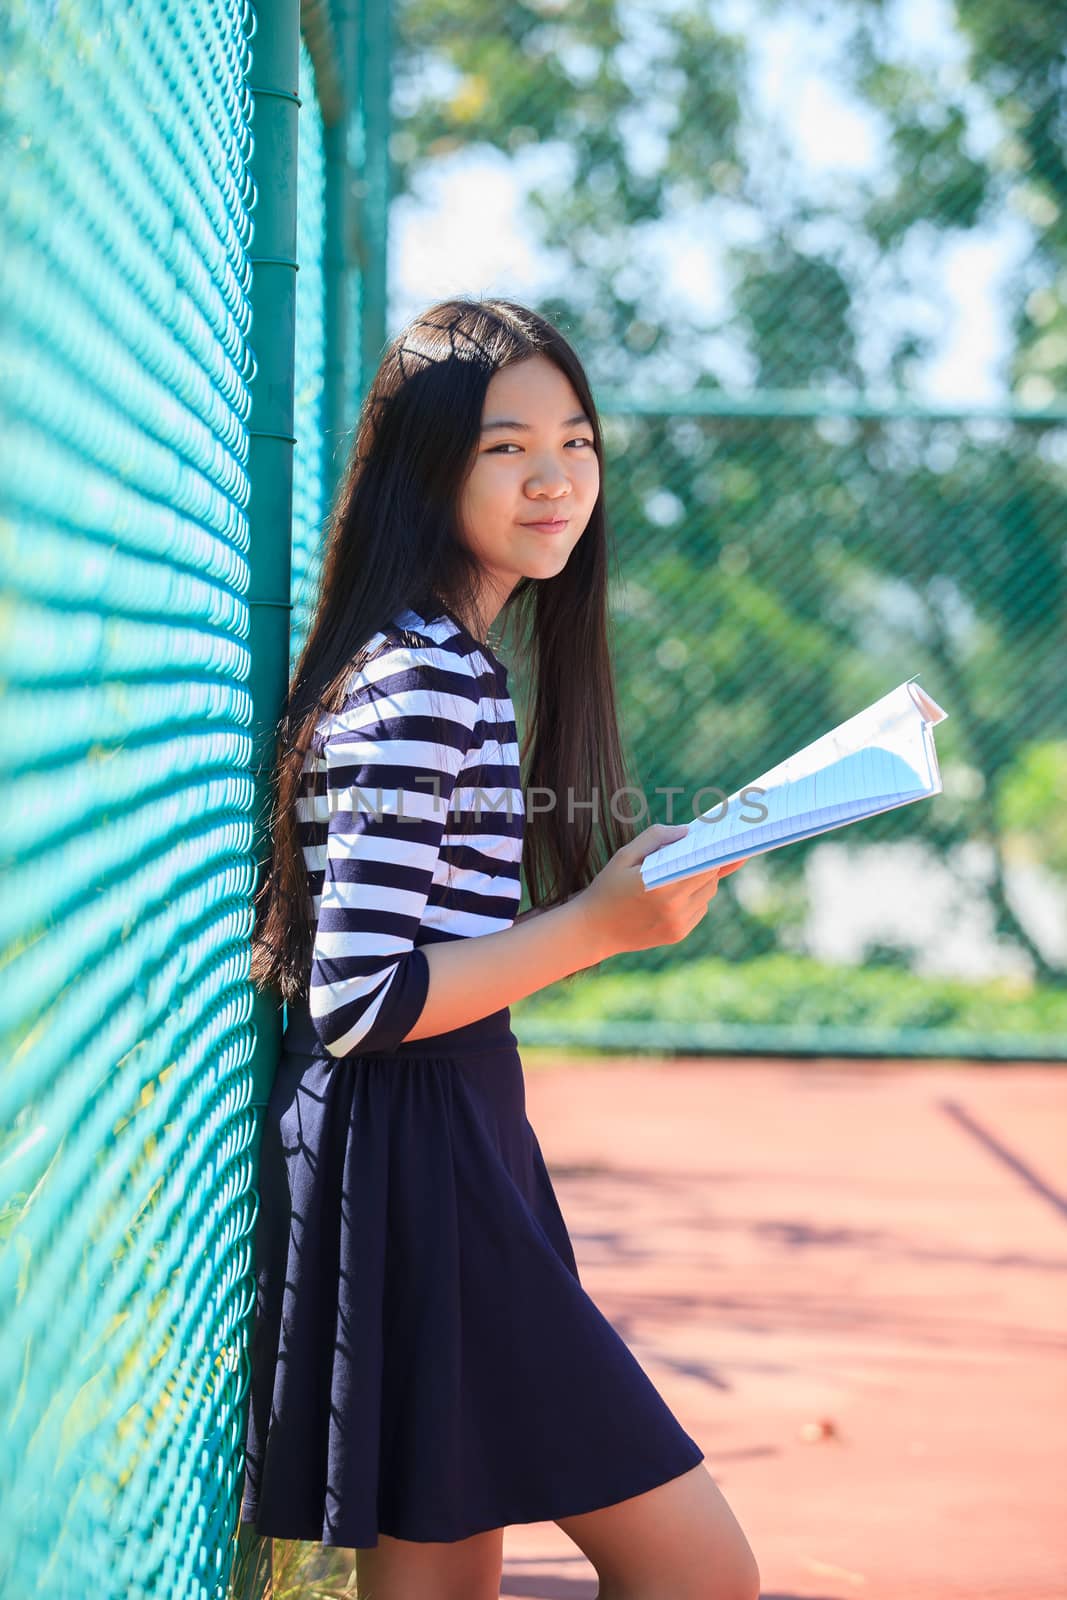 asian girl and school book in hand toothy smiling face with happiness emotion in green park